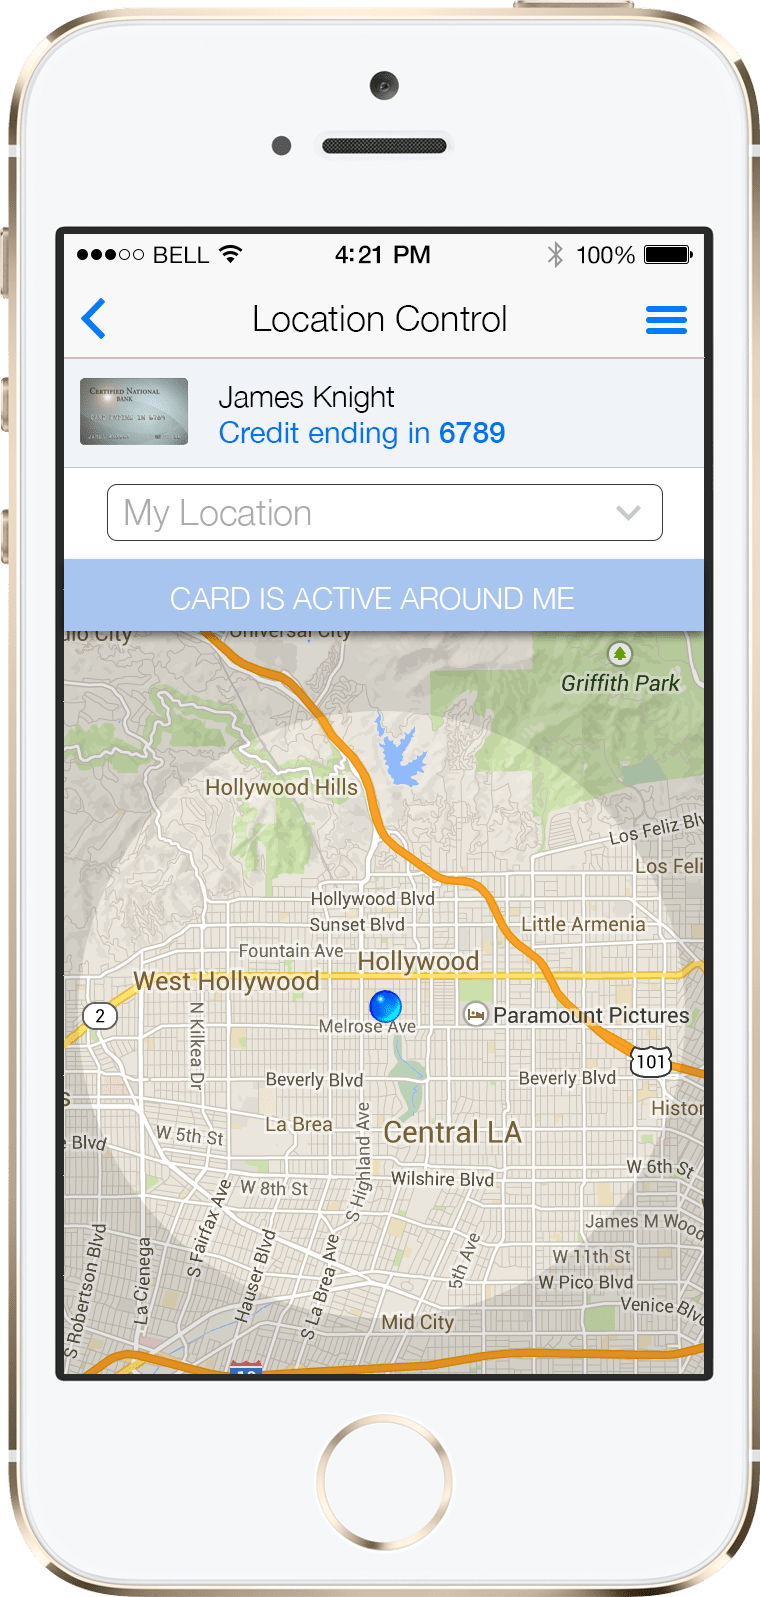 Using the location preference on the CardControl app, you can limit where card transactions can take place.